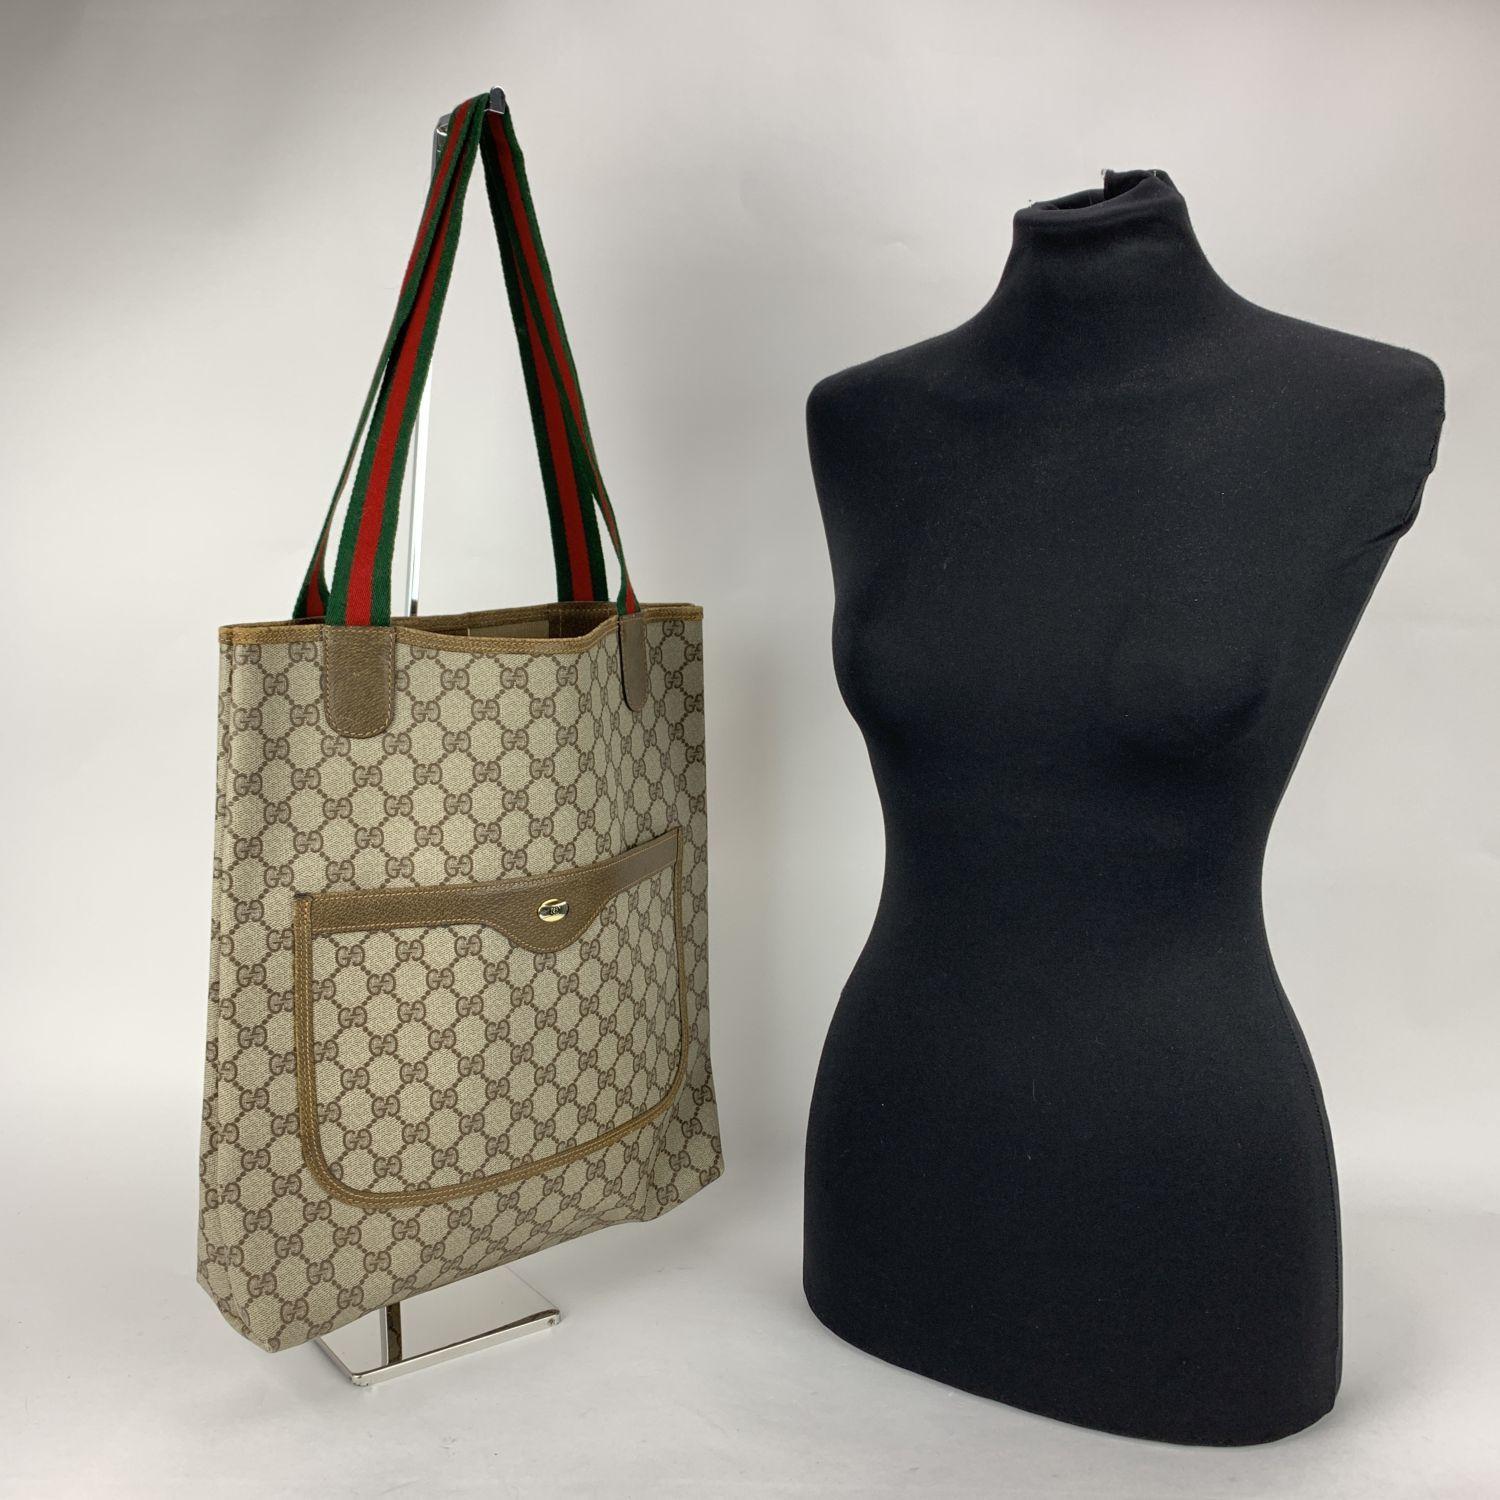 Beautiful Gucci tote made in monogram canvas with tan leather trim. Green/Red/Green striped canvas shoulder straps. 1 front patch pocket. Enameled GG- GUCCI logo tab on the front. Beige canvas lining. 'GUCCI Accessory collection - Made in Italy' tag